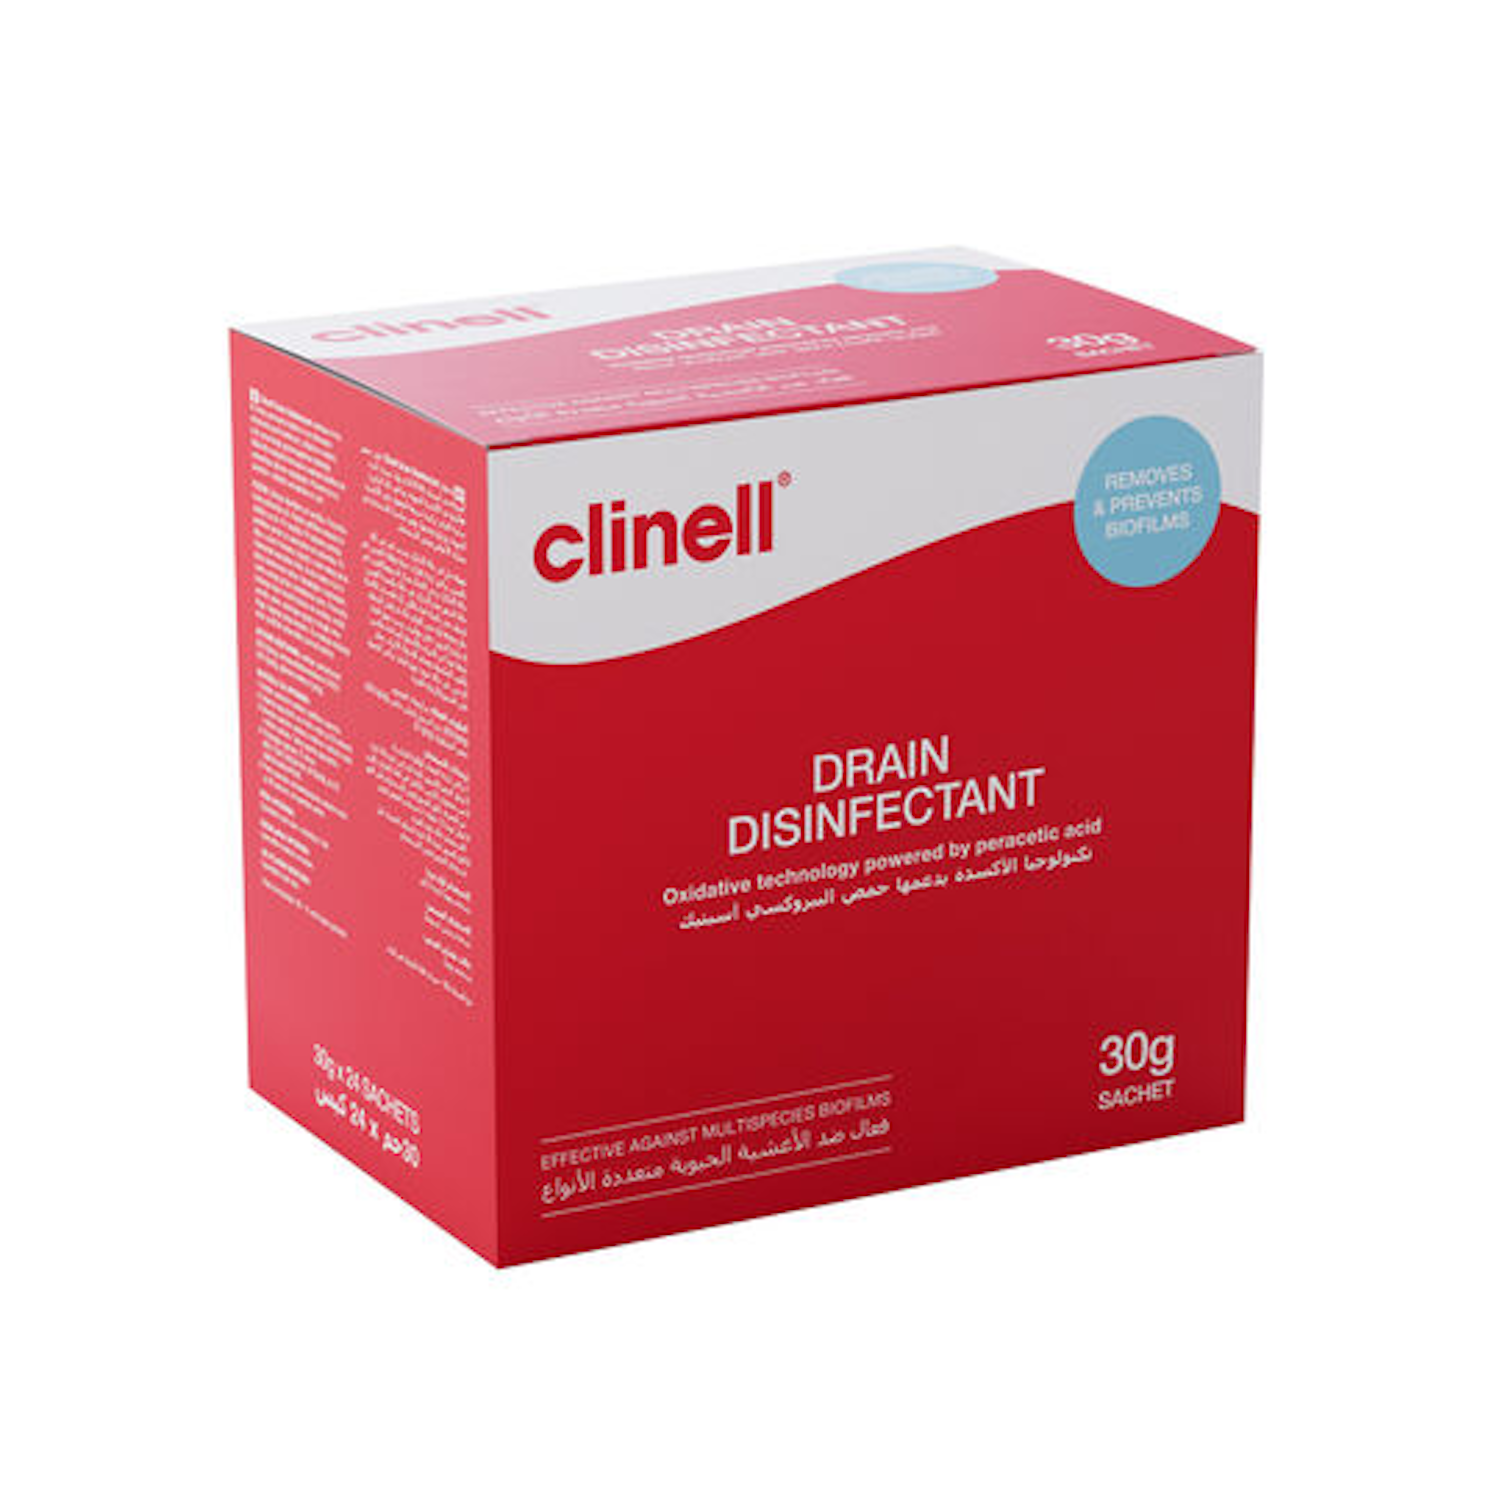 Clinell Drain Disinfectant Sachets | 30g | Pack of 24 (1)